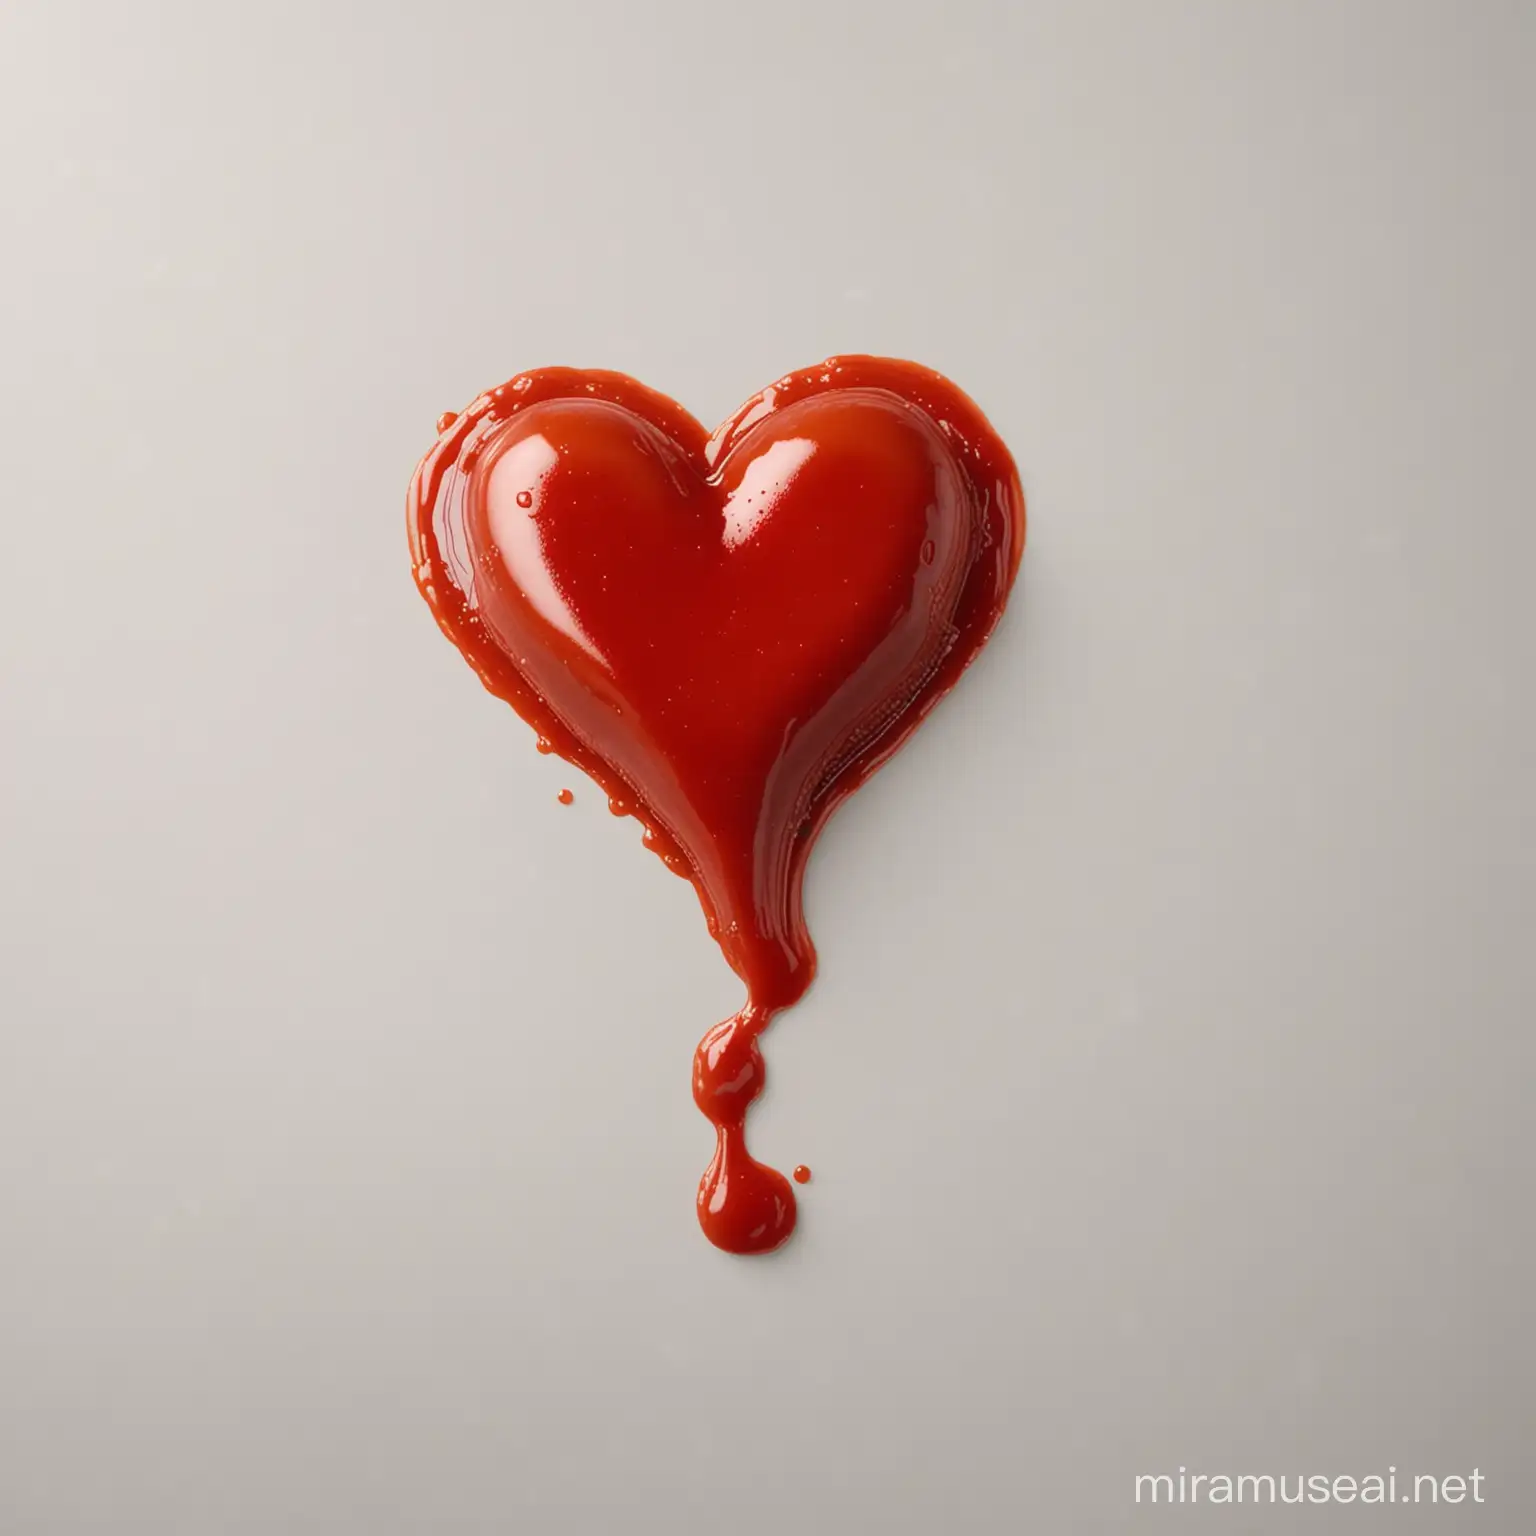 Heartshaped Ketchup Spill on Plain White Background